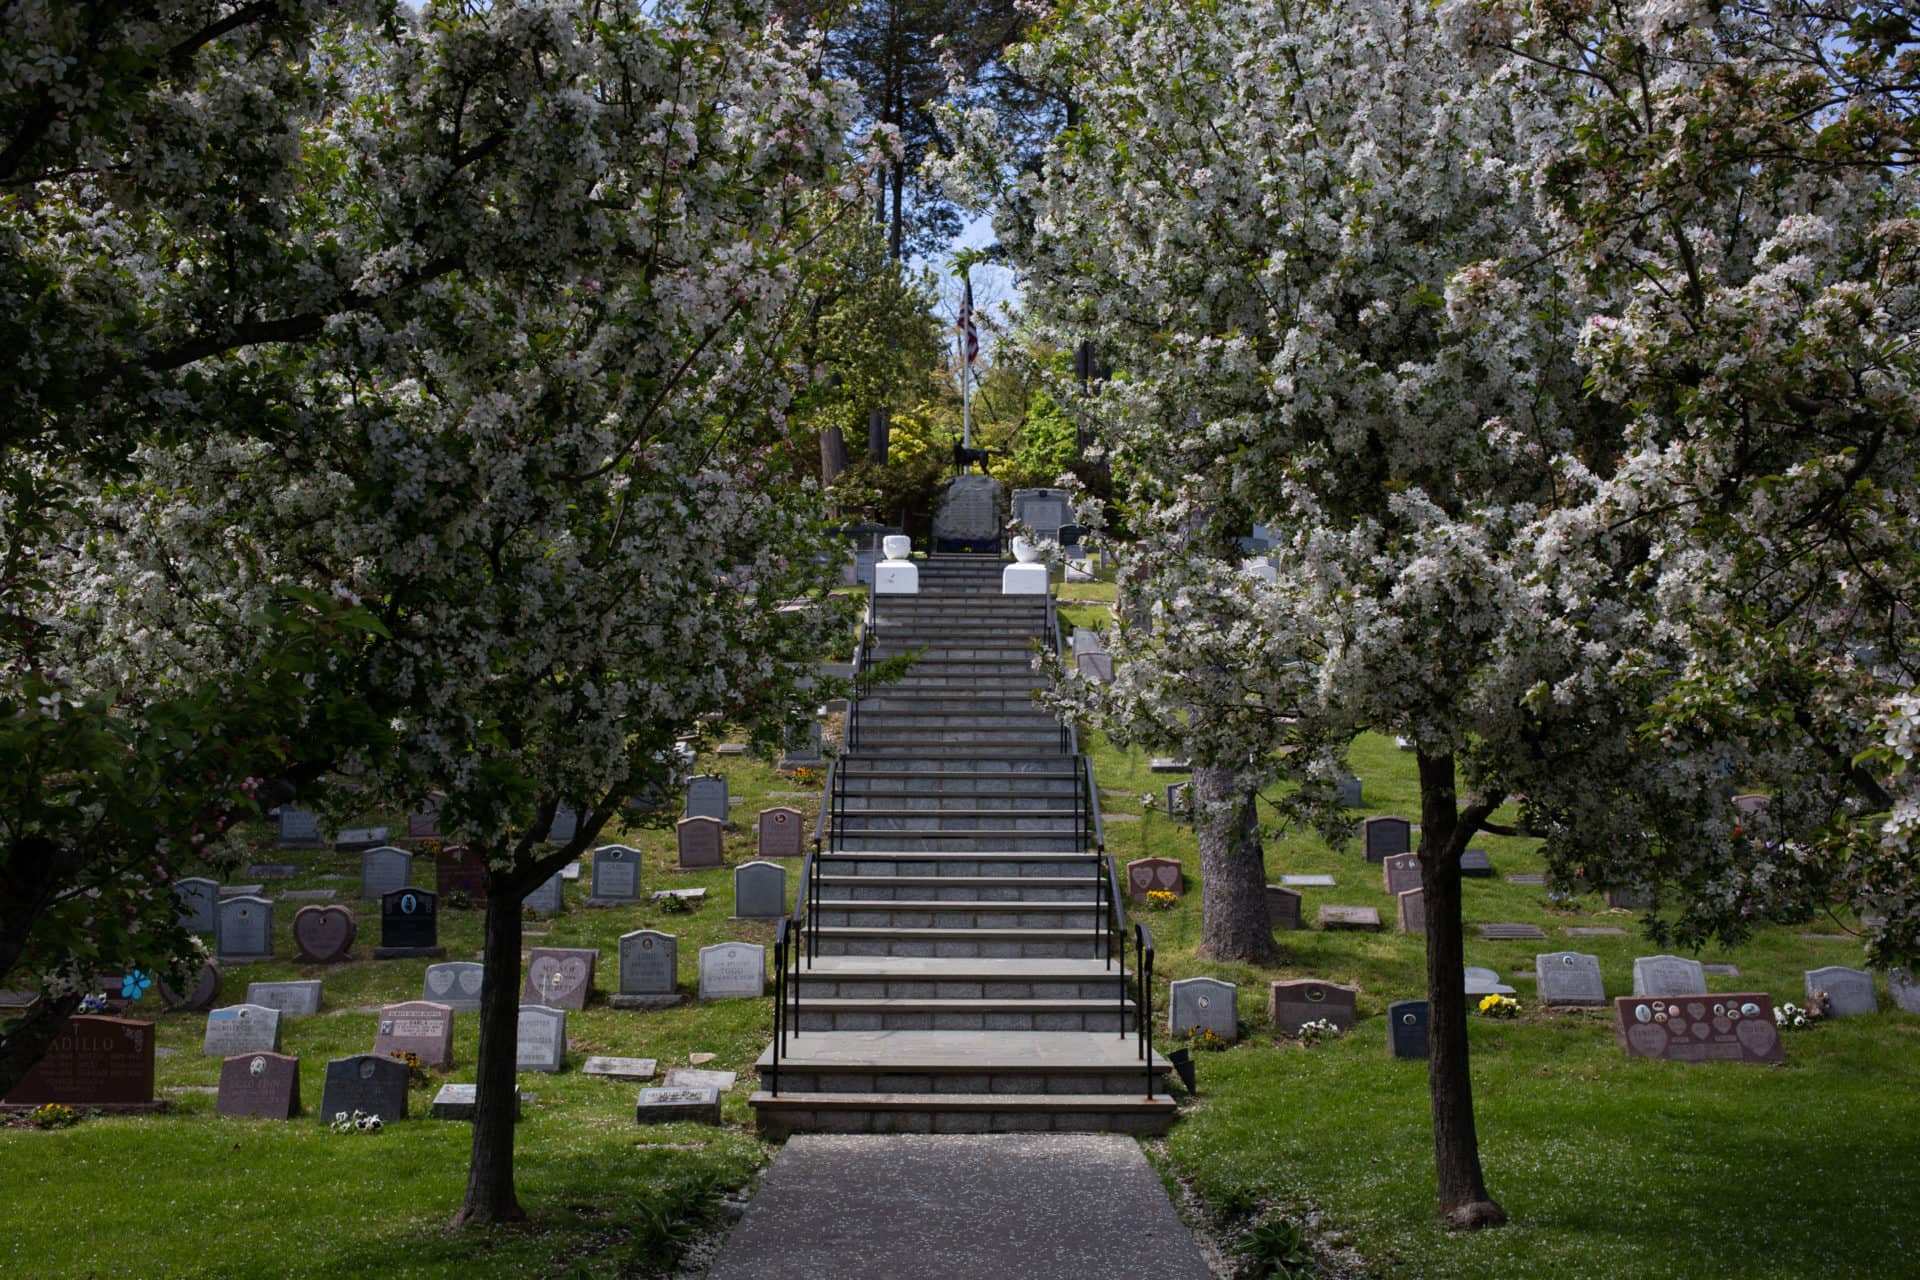 blooming cherry trees at the entrance to the cemetery